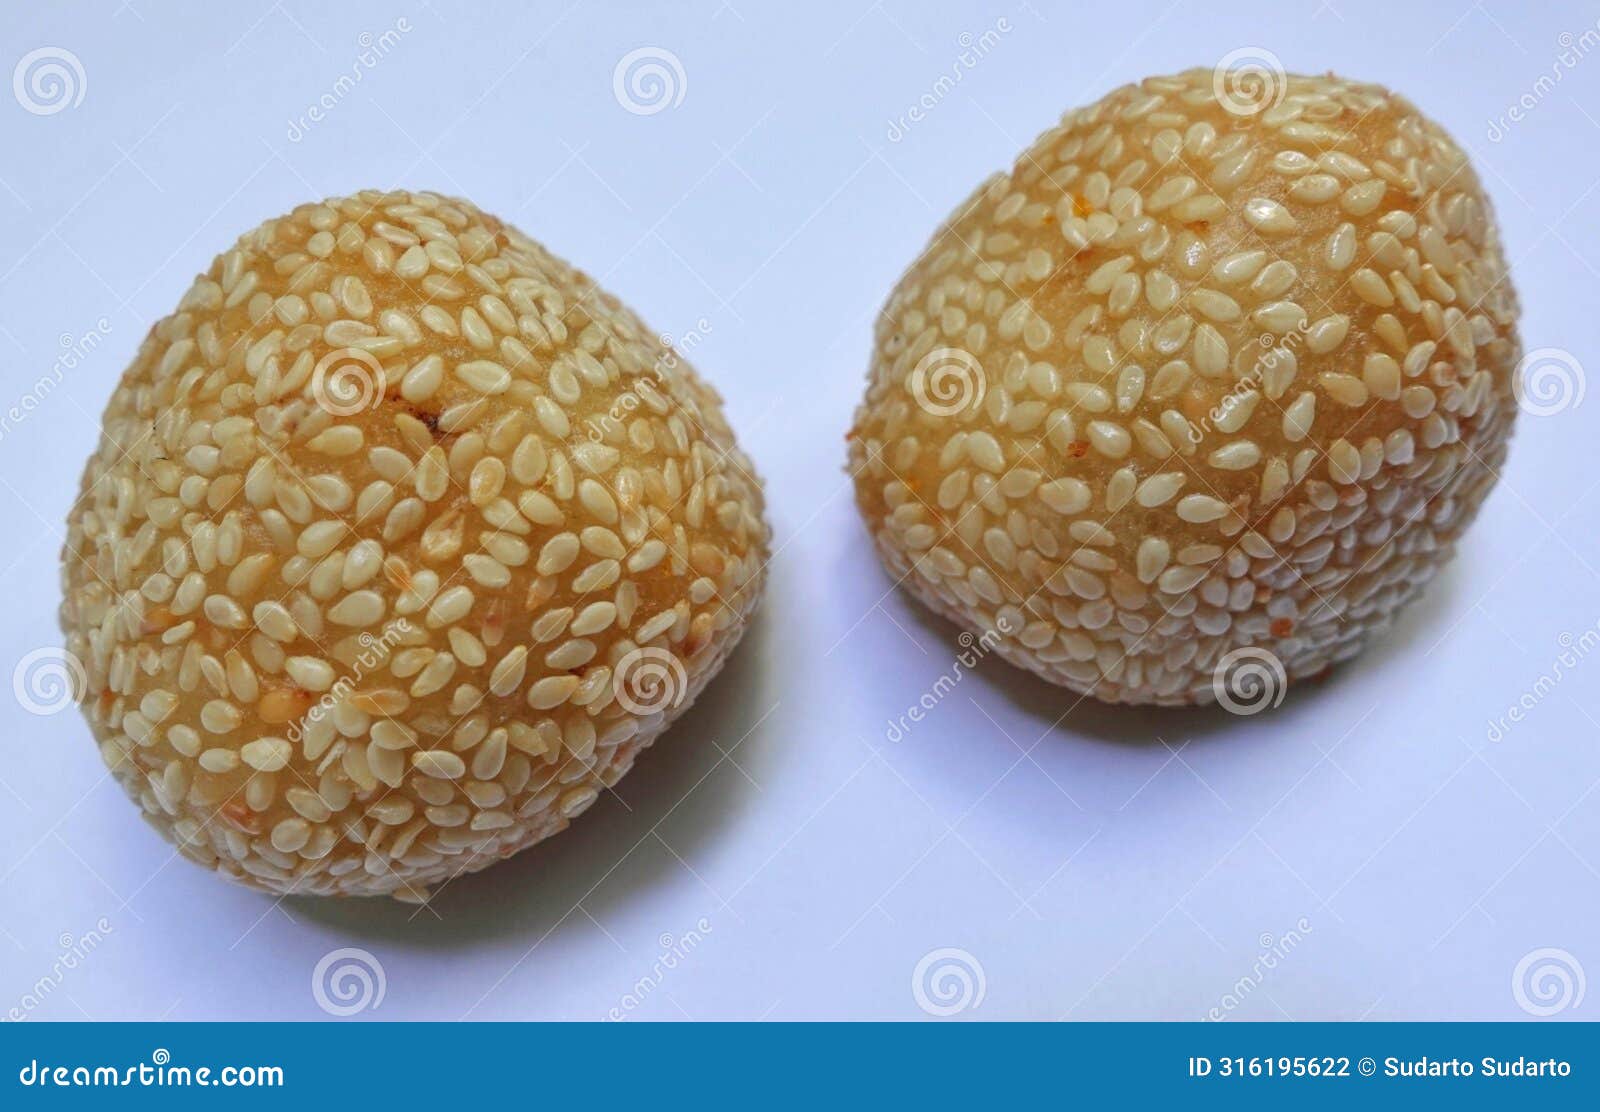 traditional indonesian cake is called onde onde.